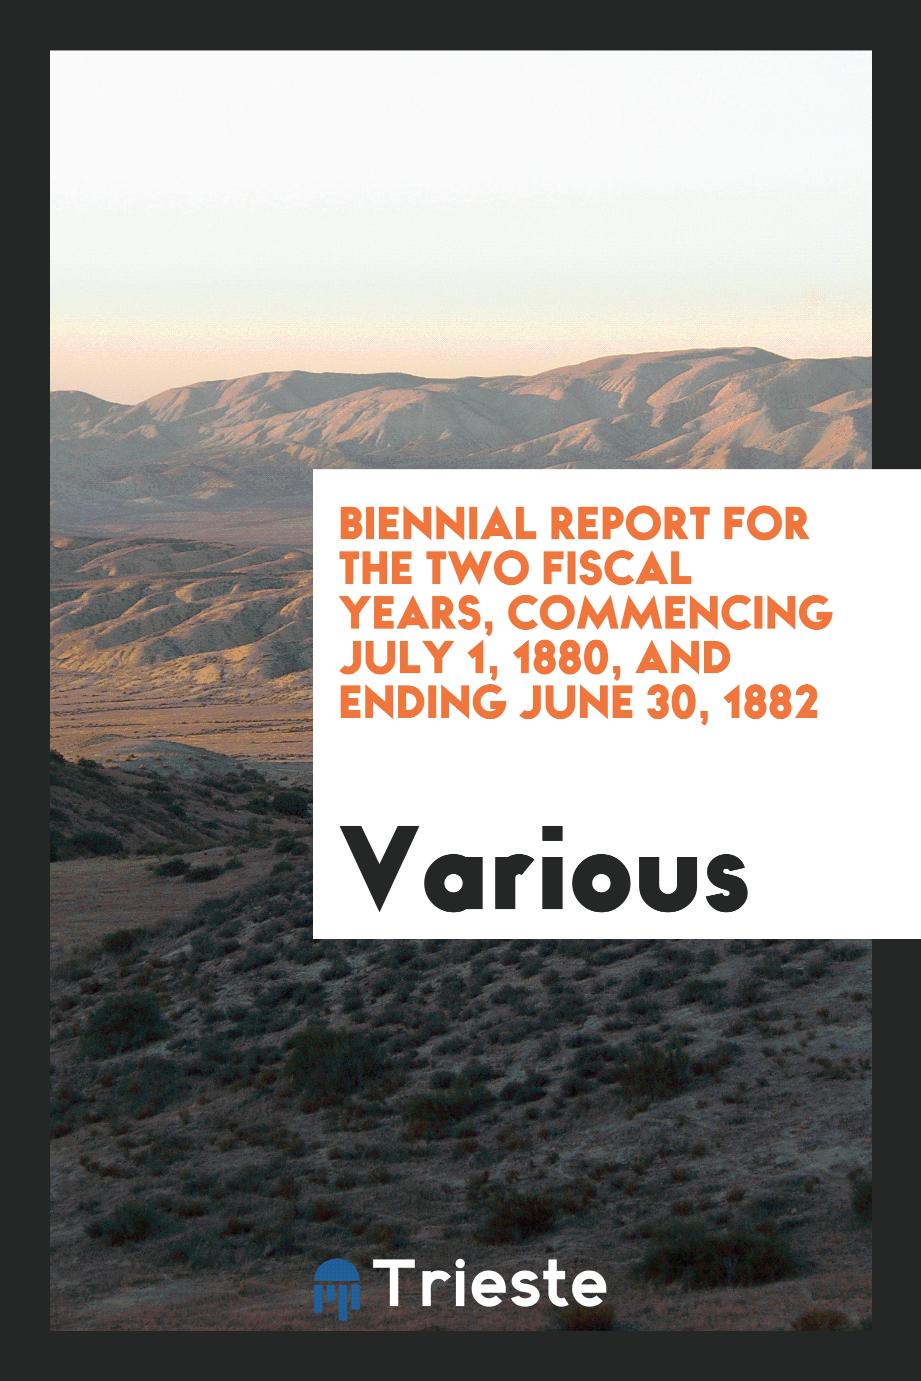 Biennial report for the two fiscal years, commencing July 1, 1880, and ending June 30, 1882